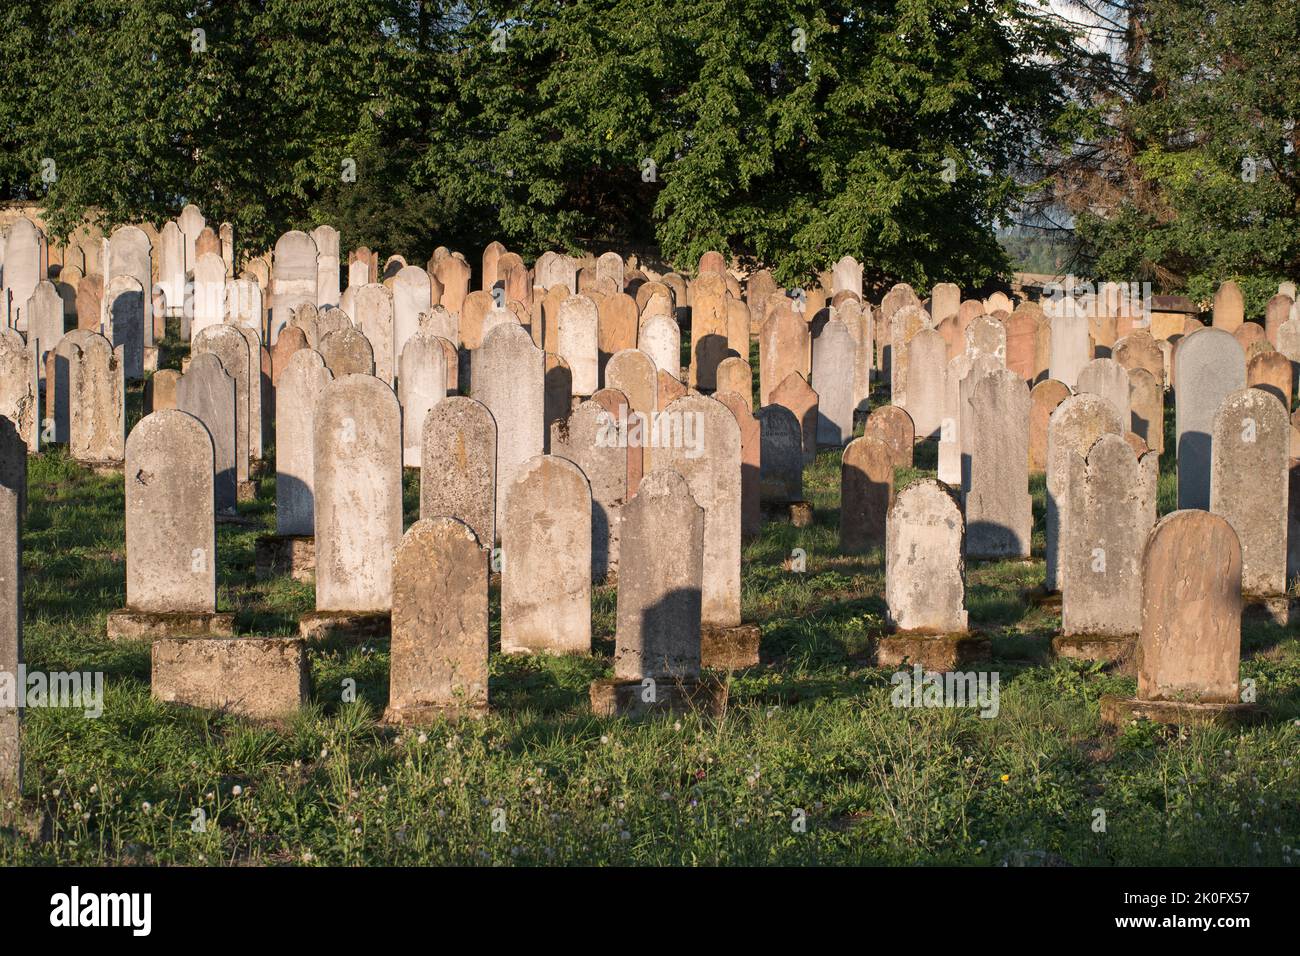 Bardejov, Slovakia. Historical Jewish cemetery from 18th to 20th century. The rows of graves are separated for women and men.  The tombstones. Stock Photo